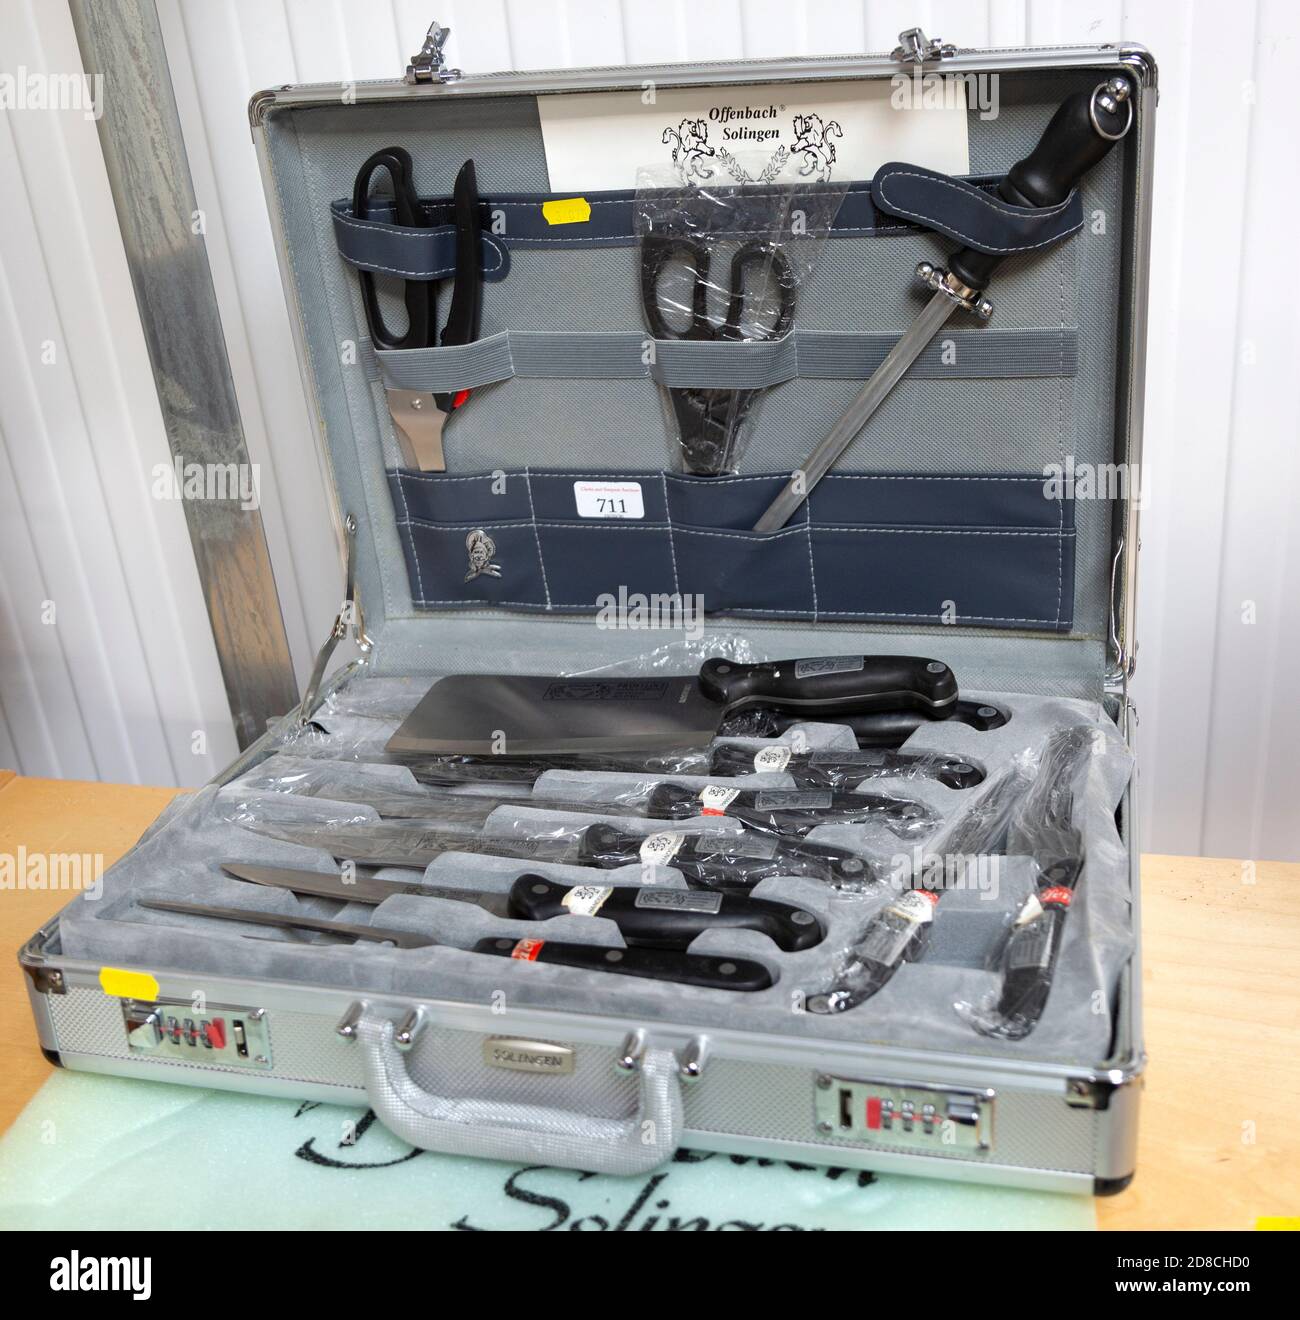 Carrying case of specialist kitchen knives by Offenbach Solingen on display  labelled for auction Stock Photo - Alamy